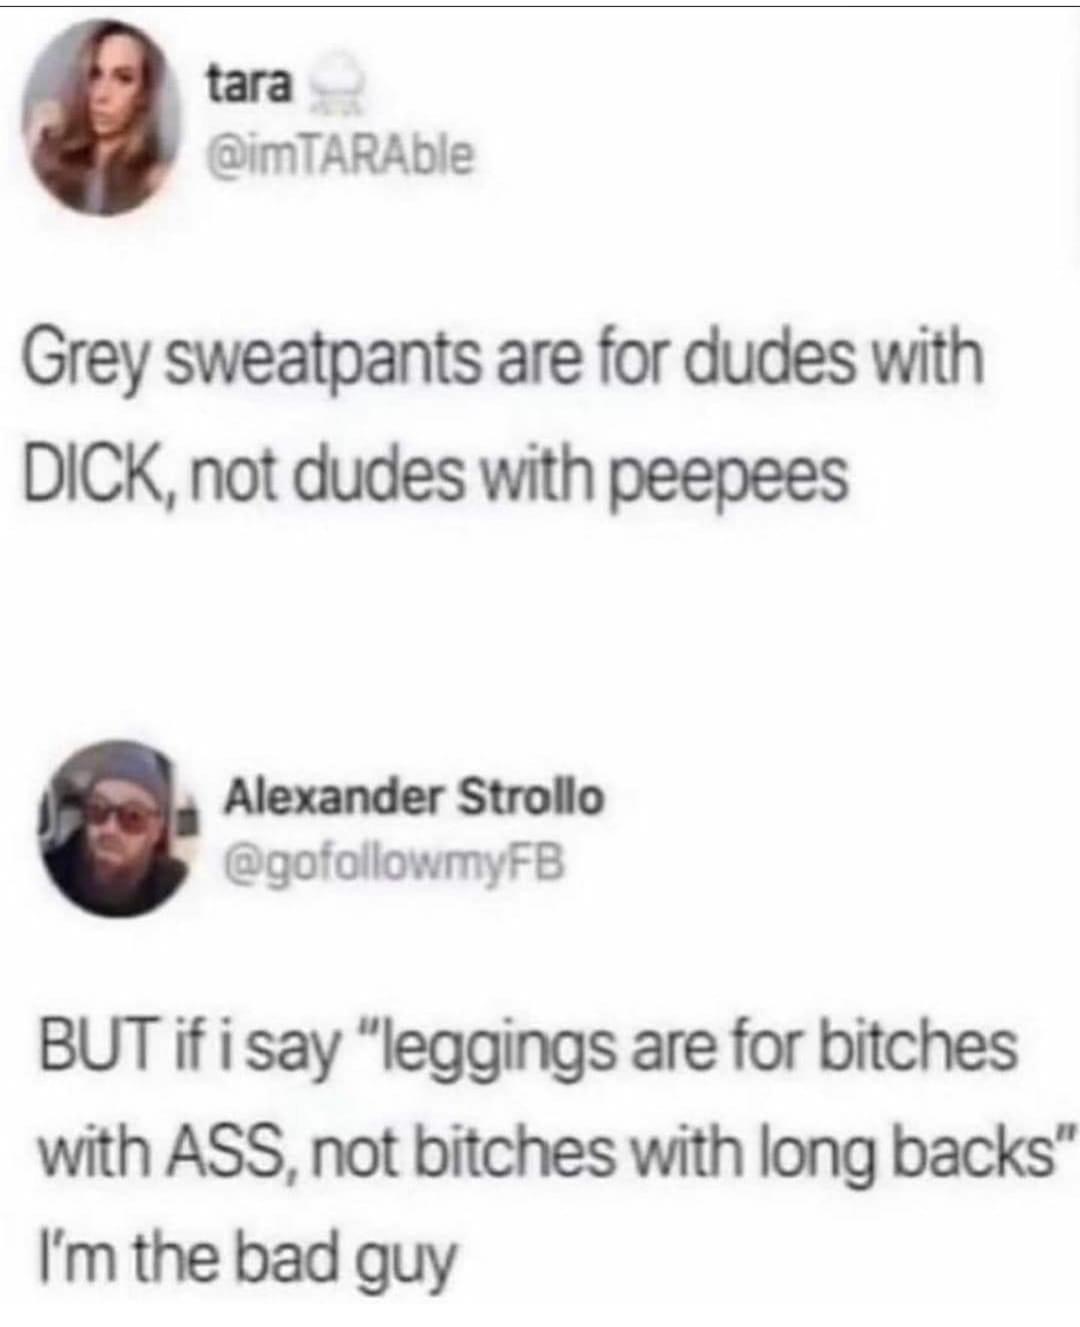 document - tara Grey sweatpants are for dudes with Dick, not dudes with peepees Alexander Strollo But if i say "leggings are for bitches with Ass, not bitches with long backs" I'm the bad guy